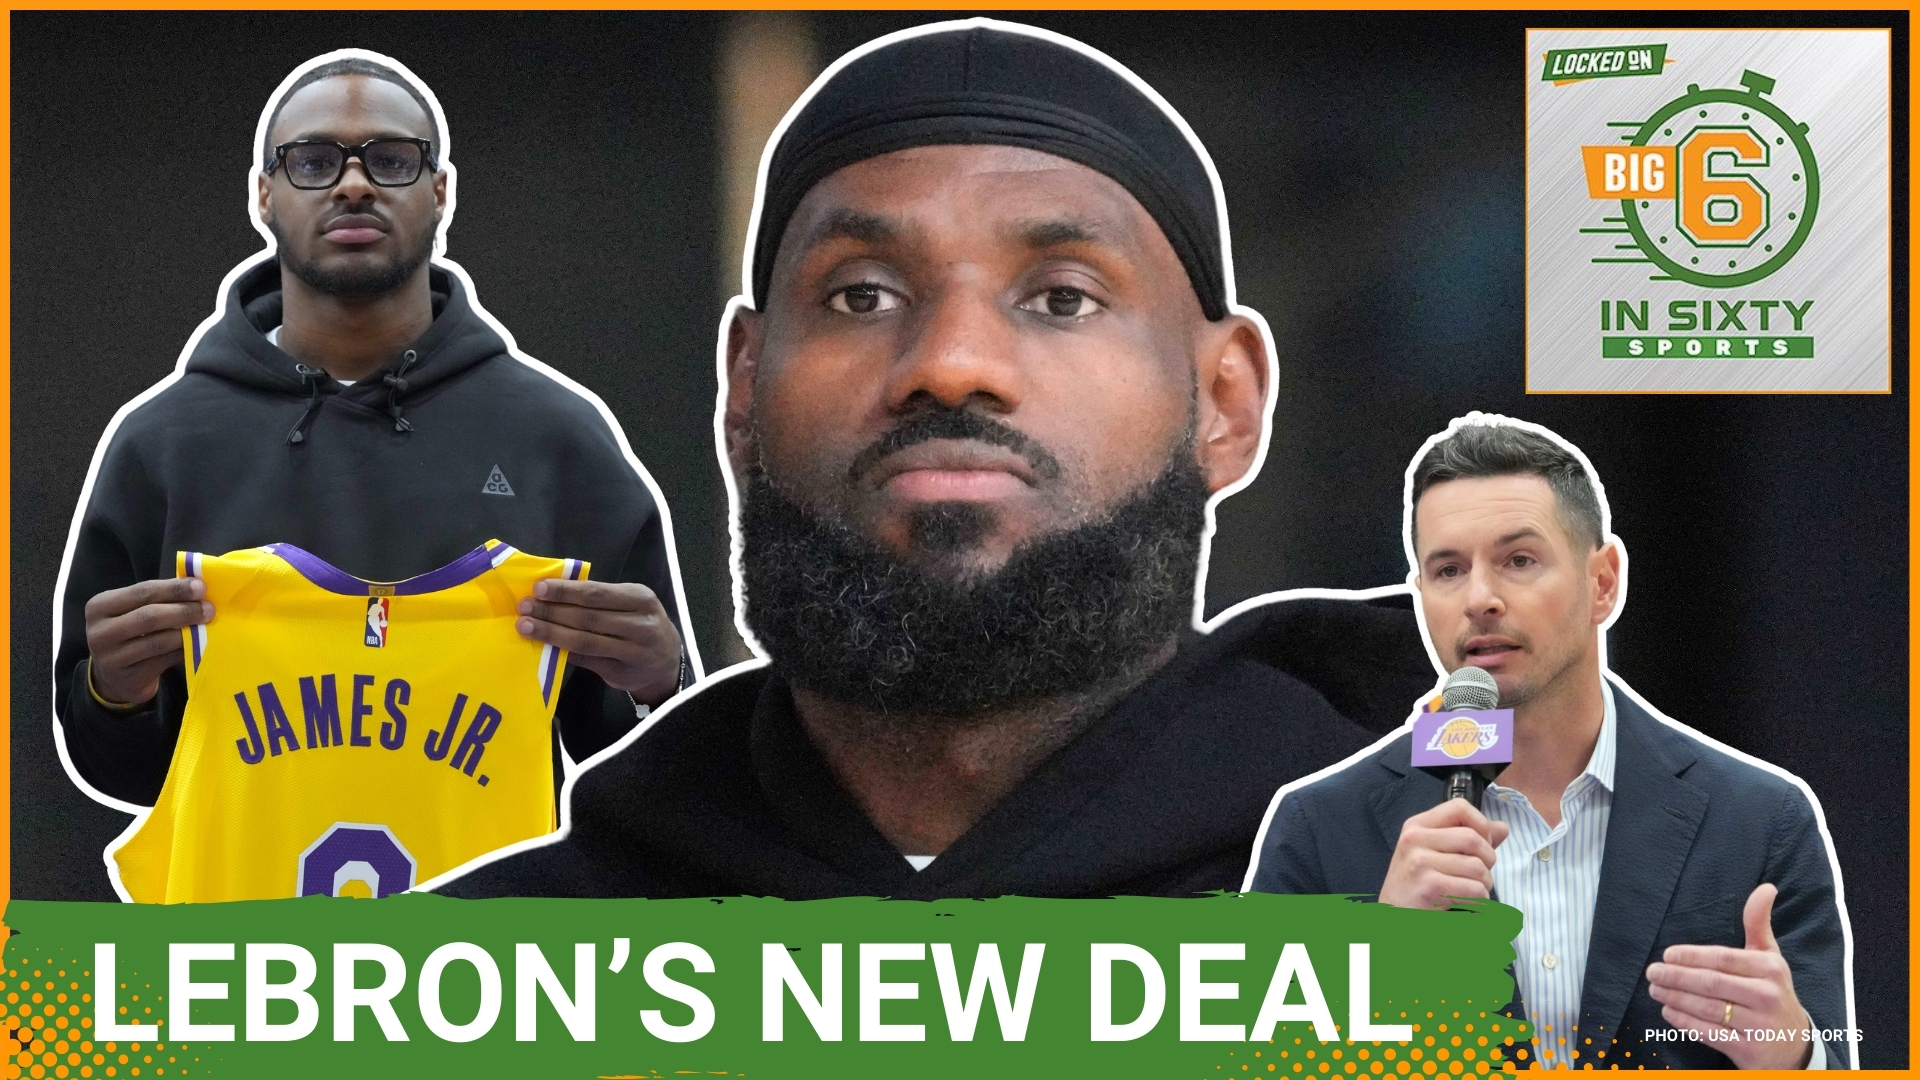 LeBron James signs a two-year extension with the Lakers, while Donovan Mitchell gets three years from the Cavs. The NFL suspends safety Tashaun Gipson.